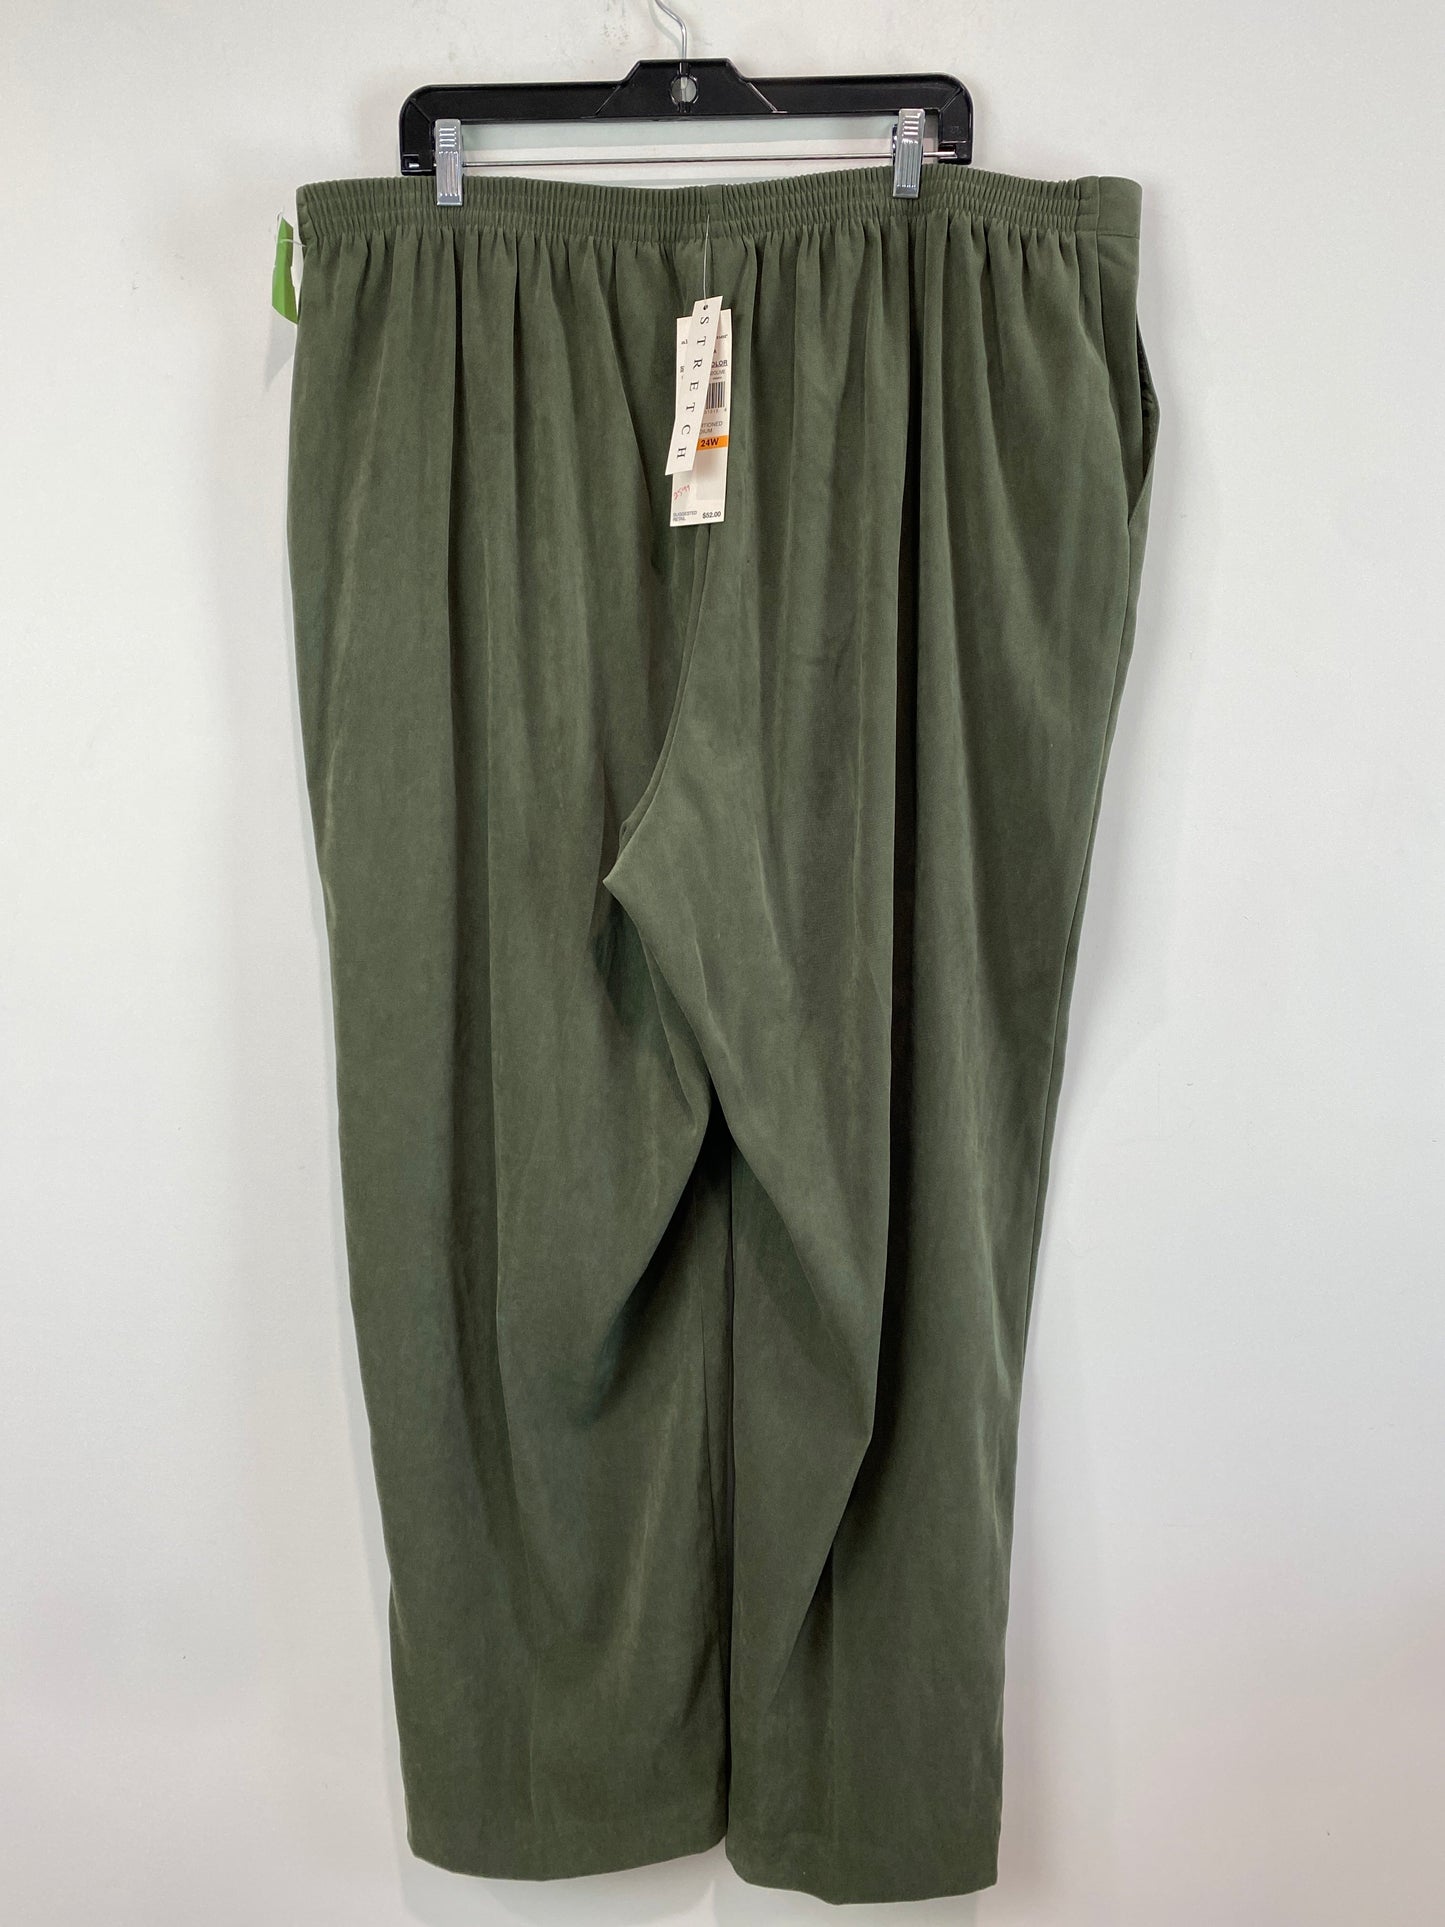 Pants Other By Alfred Dunner  Size: 3x